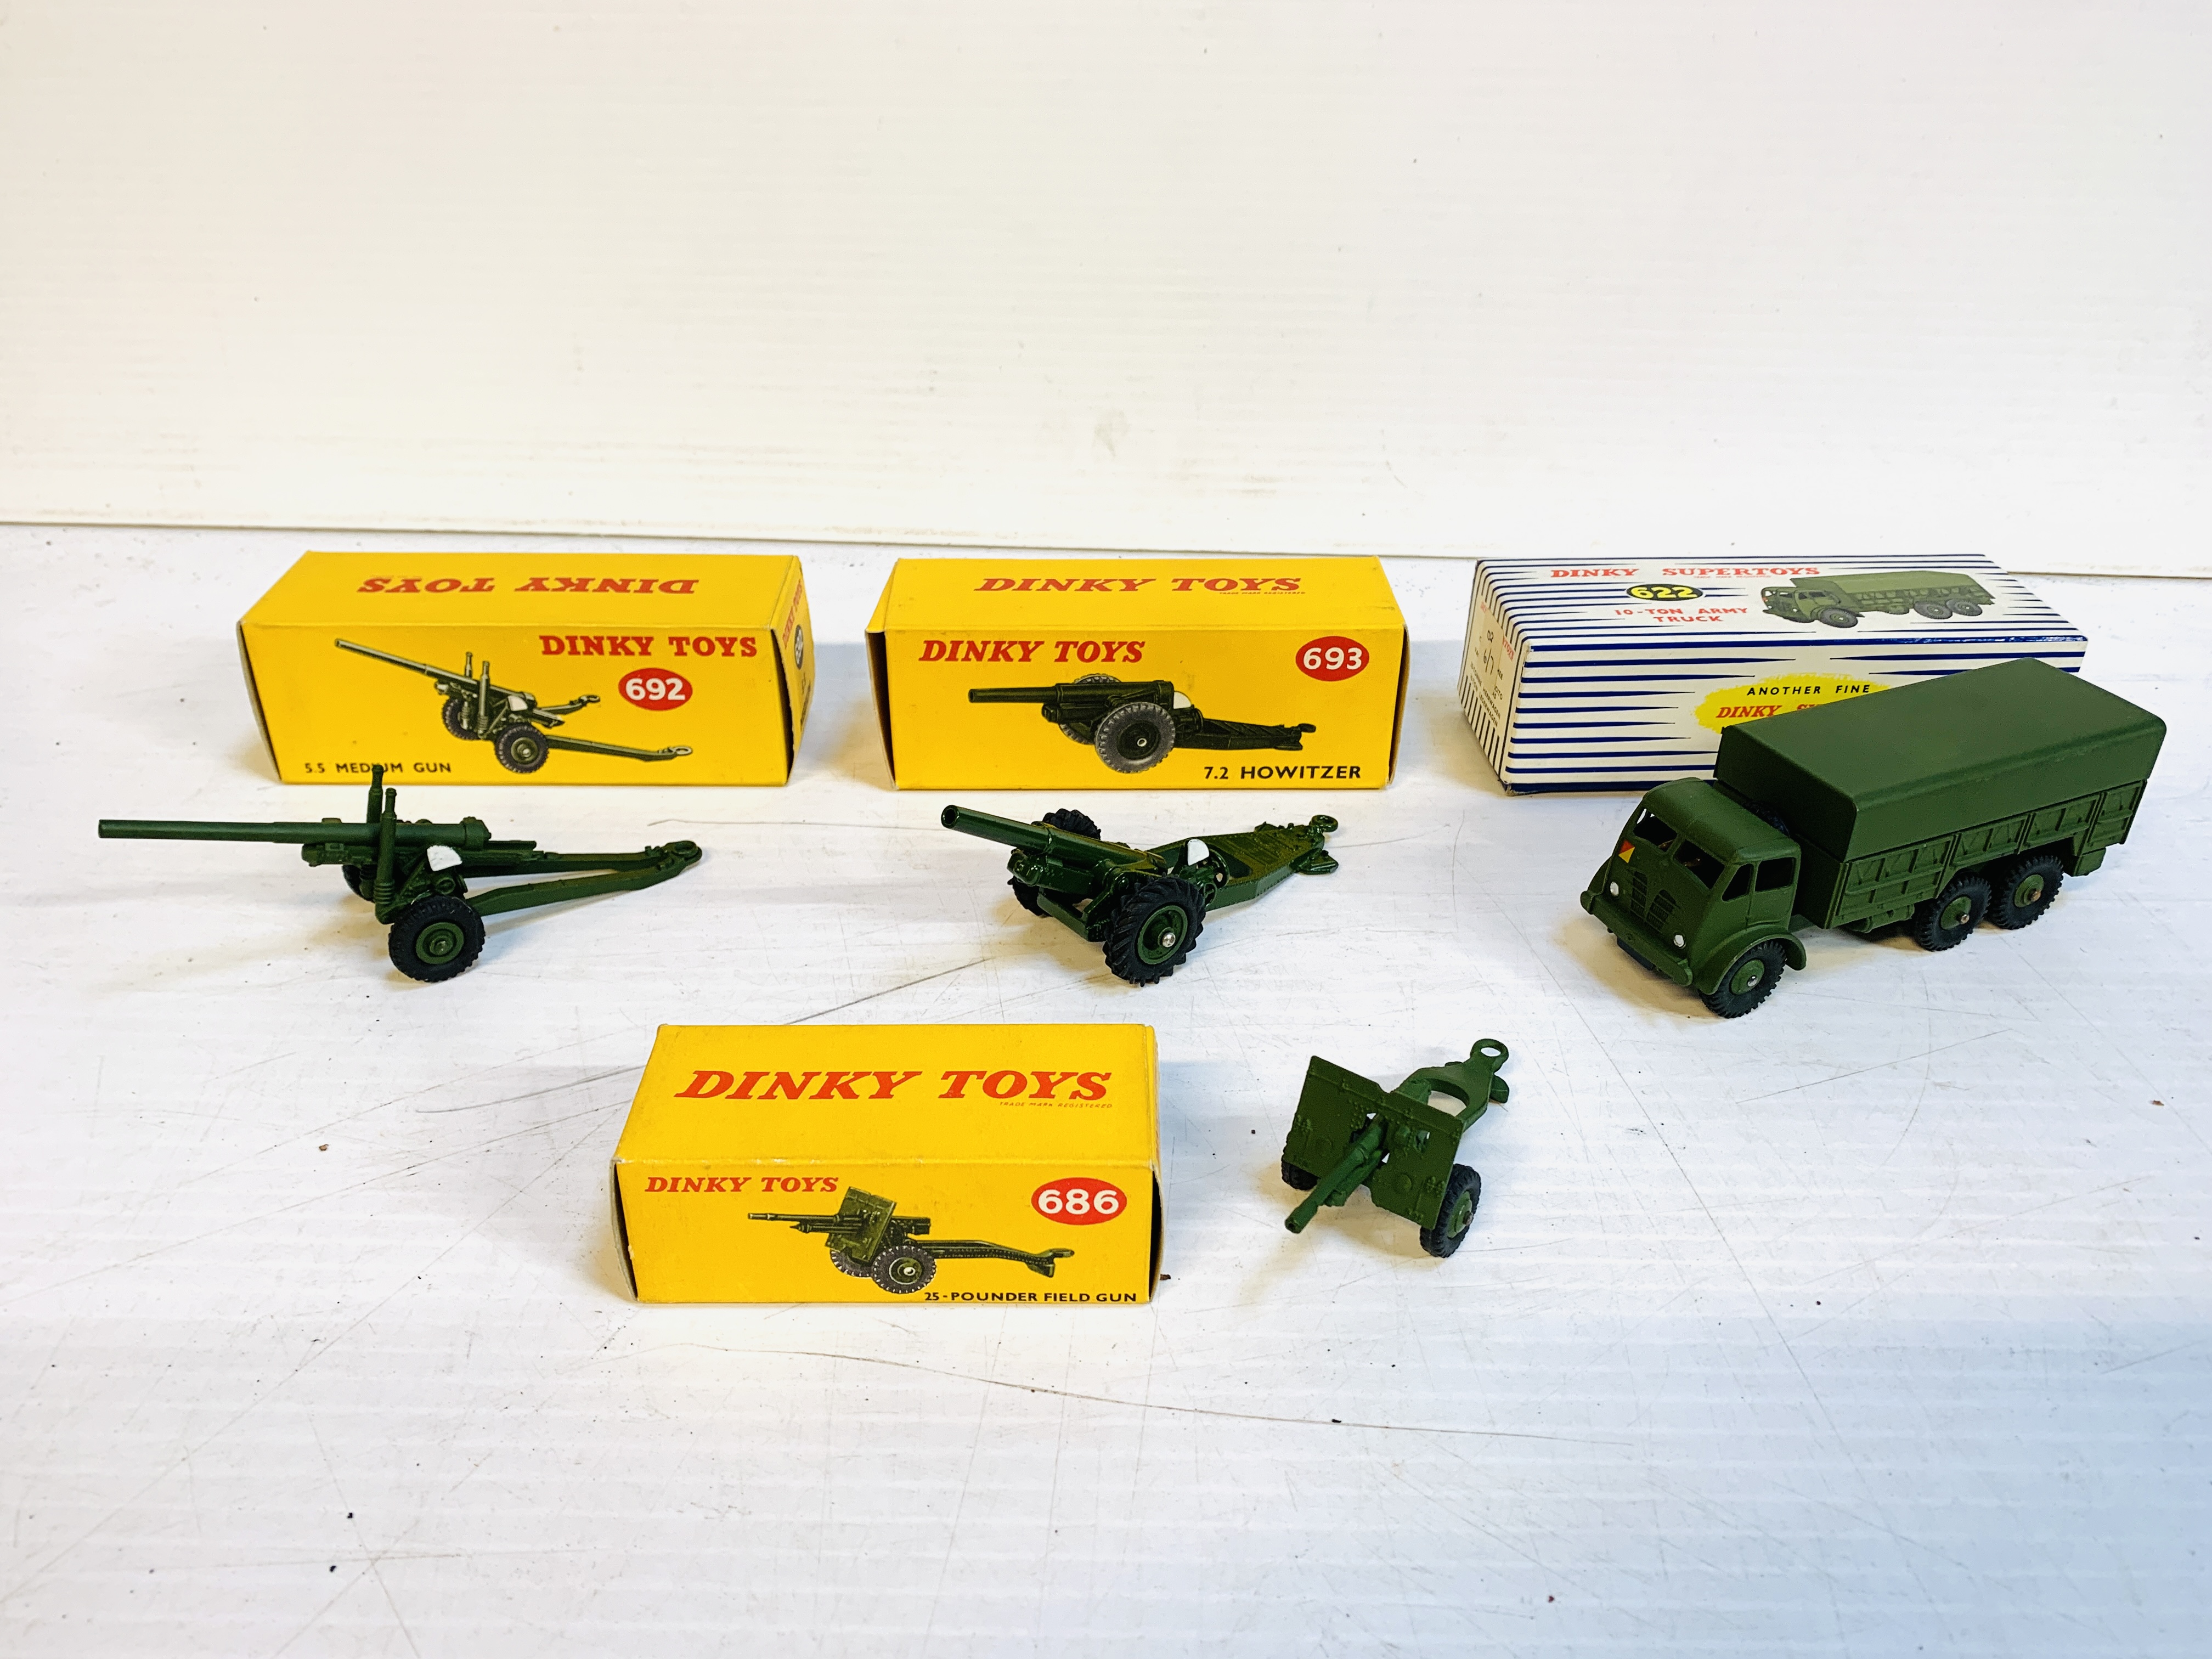 A collection of Dinky military vehicles and guns